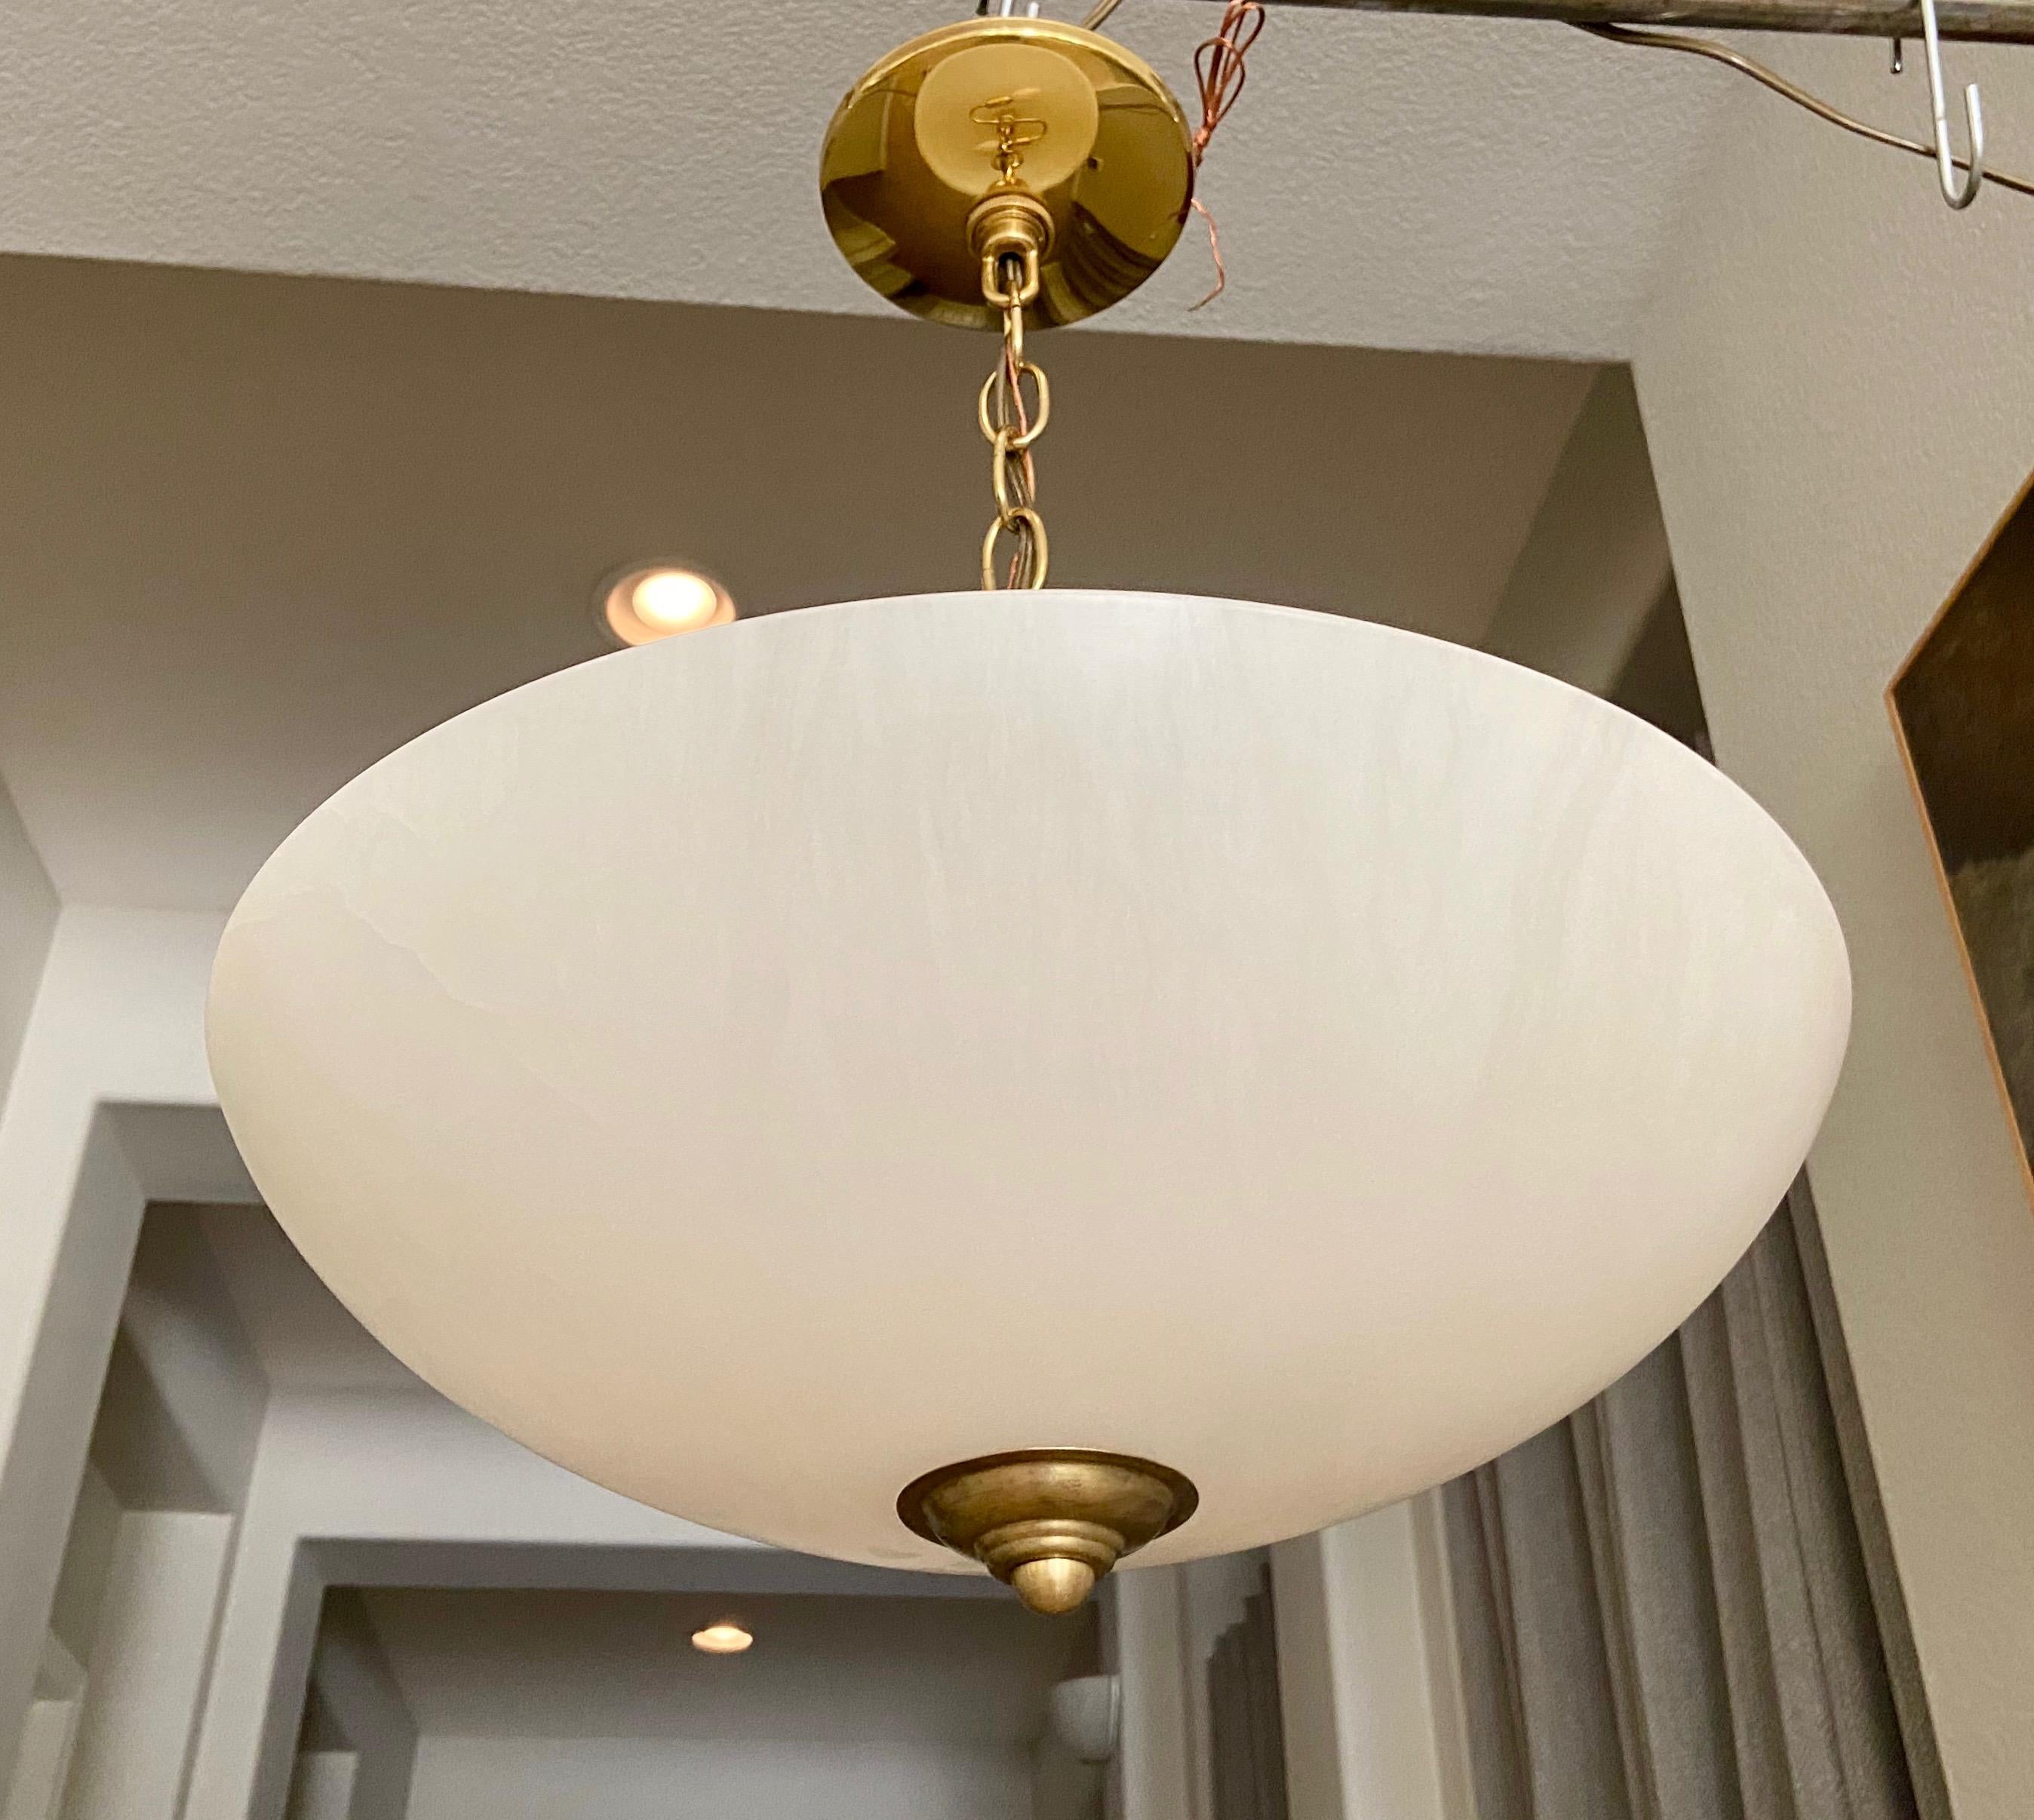 Classic style alabaster pendant or chandelier with 2 lights and brass fittings. Fixture uses two regular candelabras size 60 watt LED bulbs. Alabaster pendant is a Classic and versatile choice in lighting. Perfect for hall entry or eating